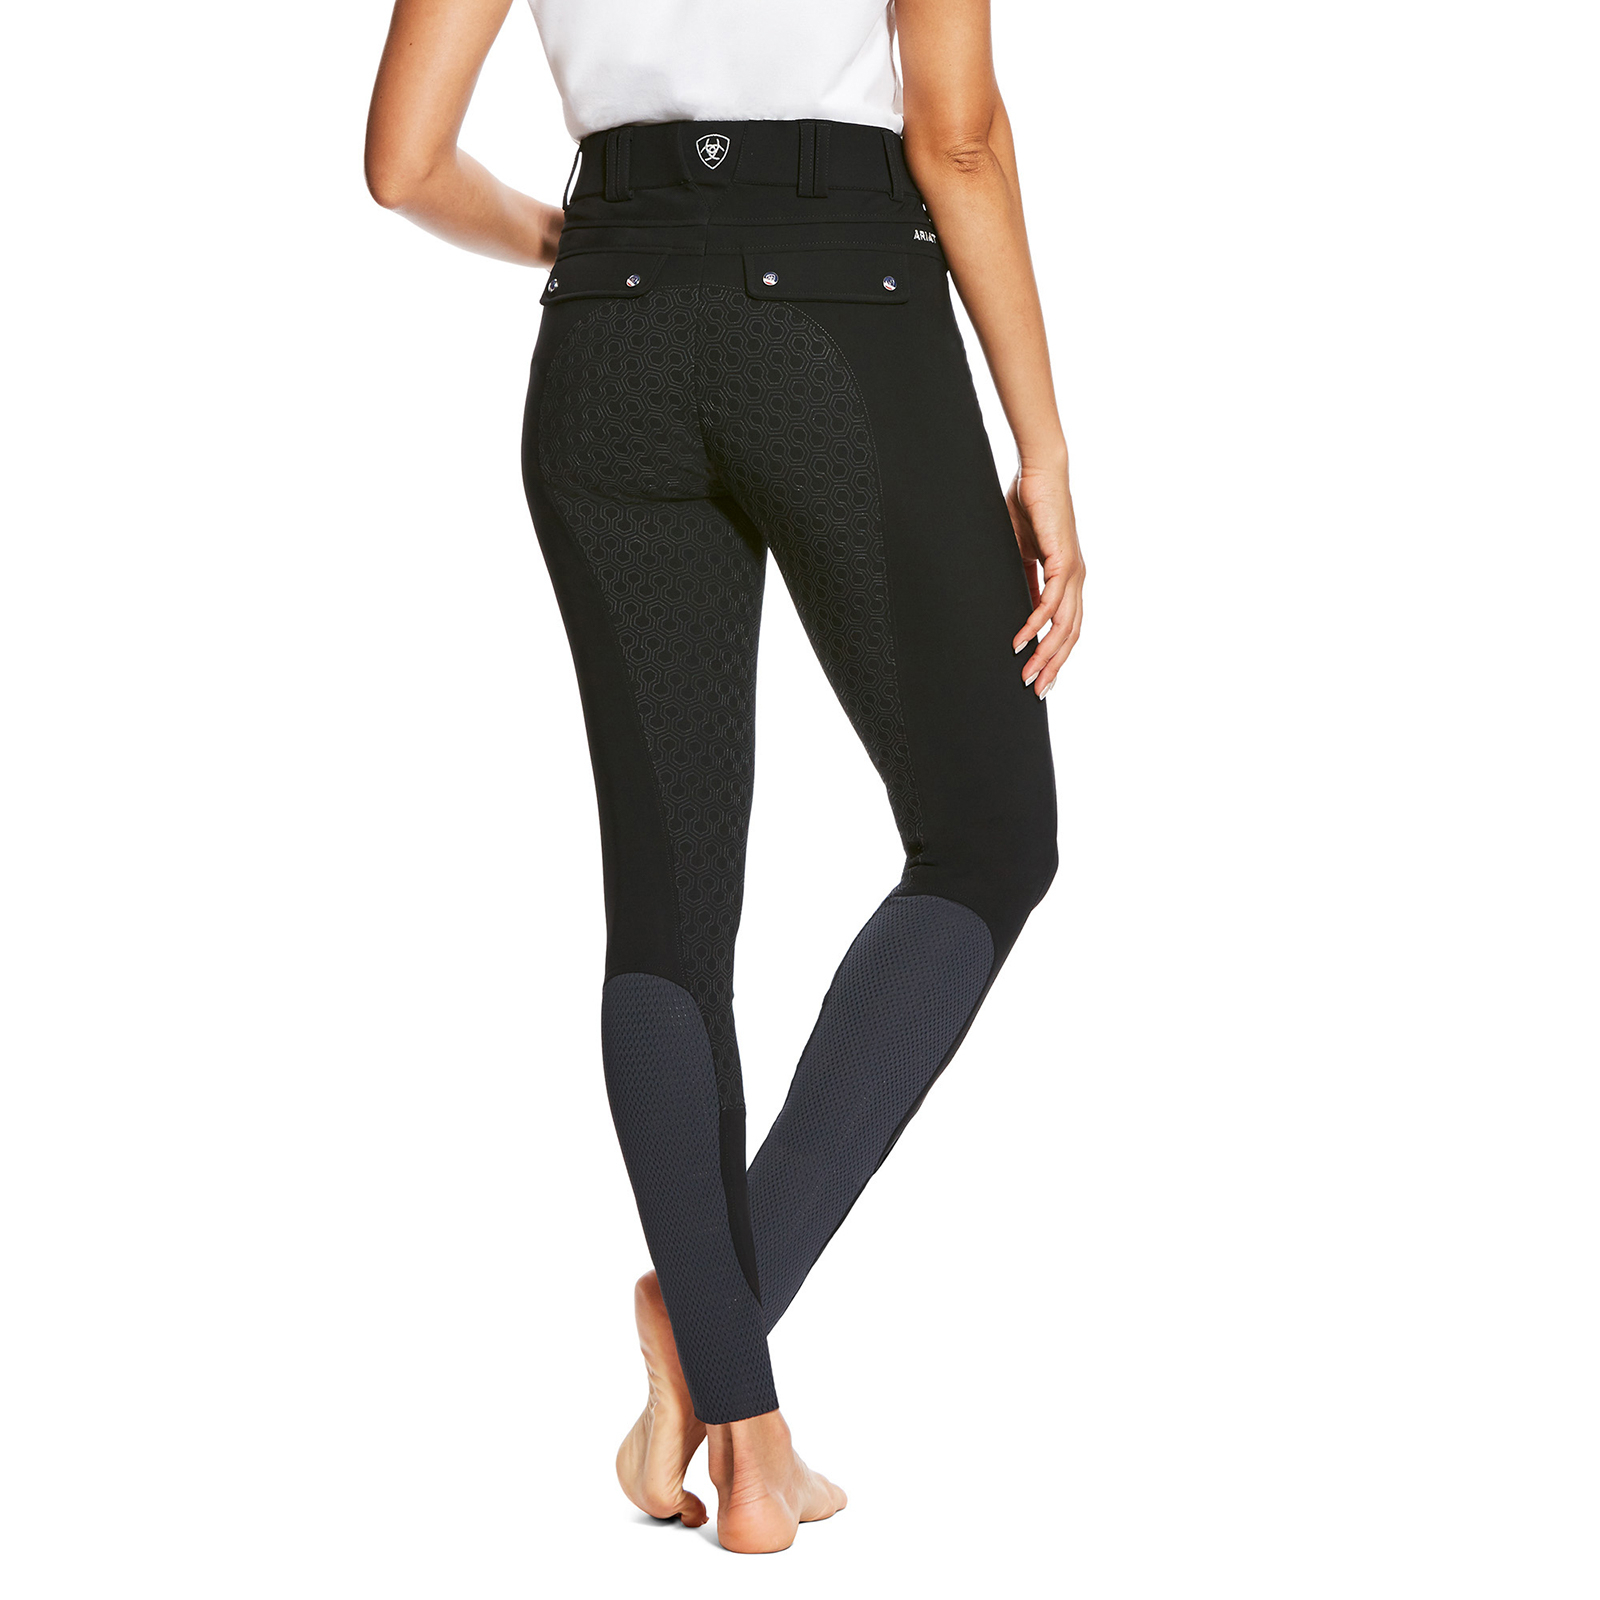 Buy Ariat Tri Factor Full Seat Breeches with Silicone Grip for Women